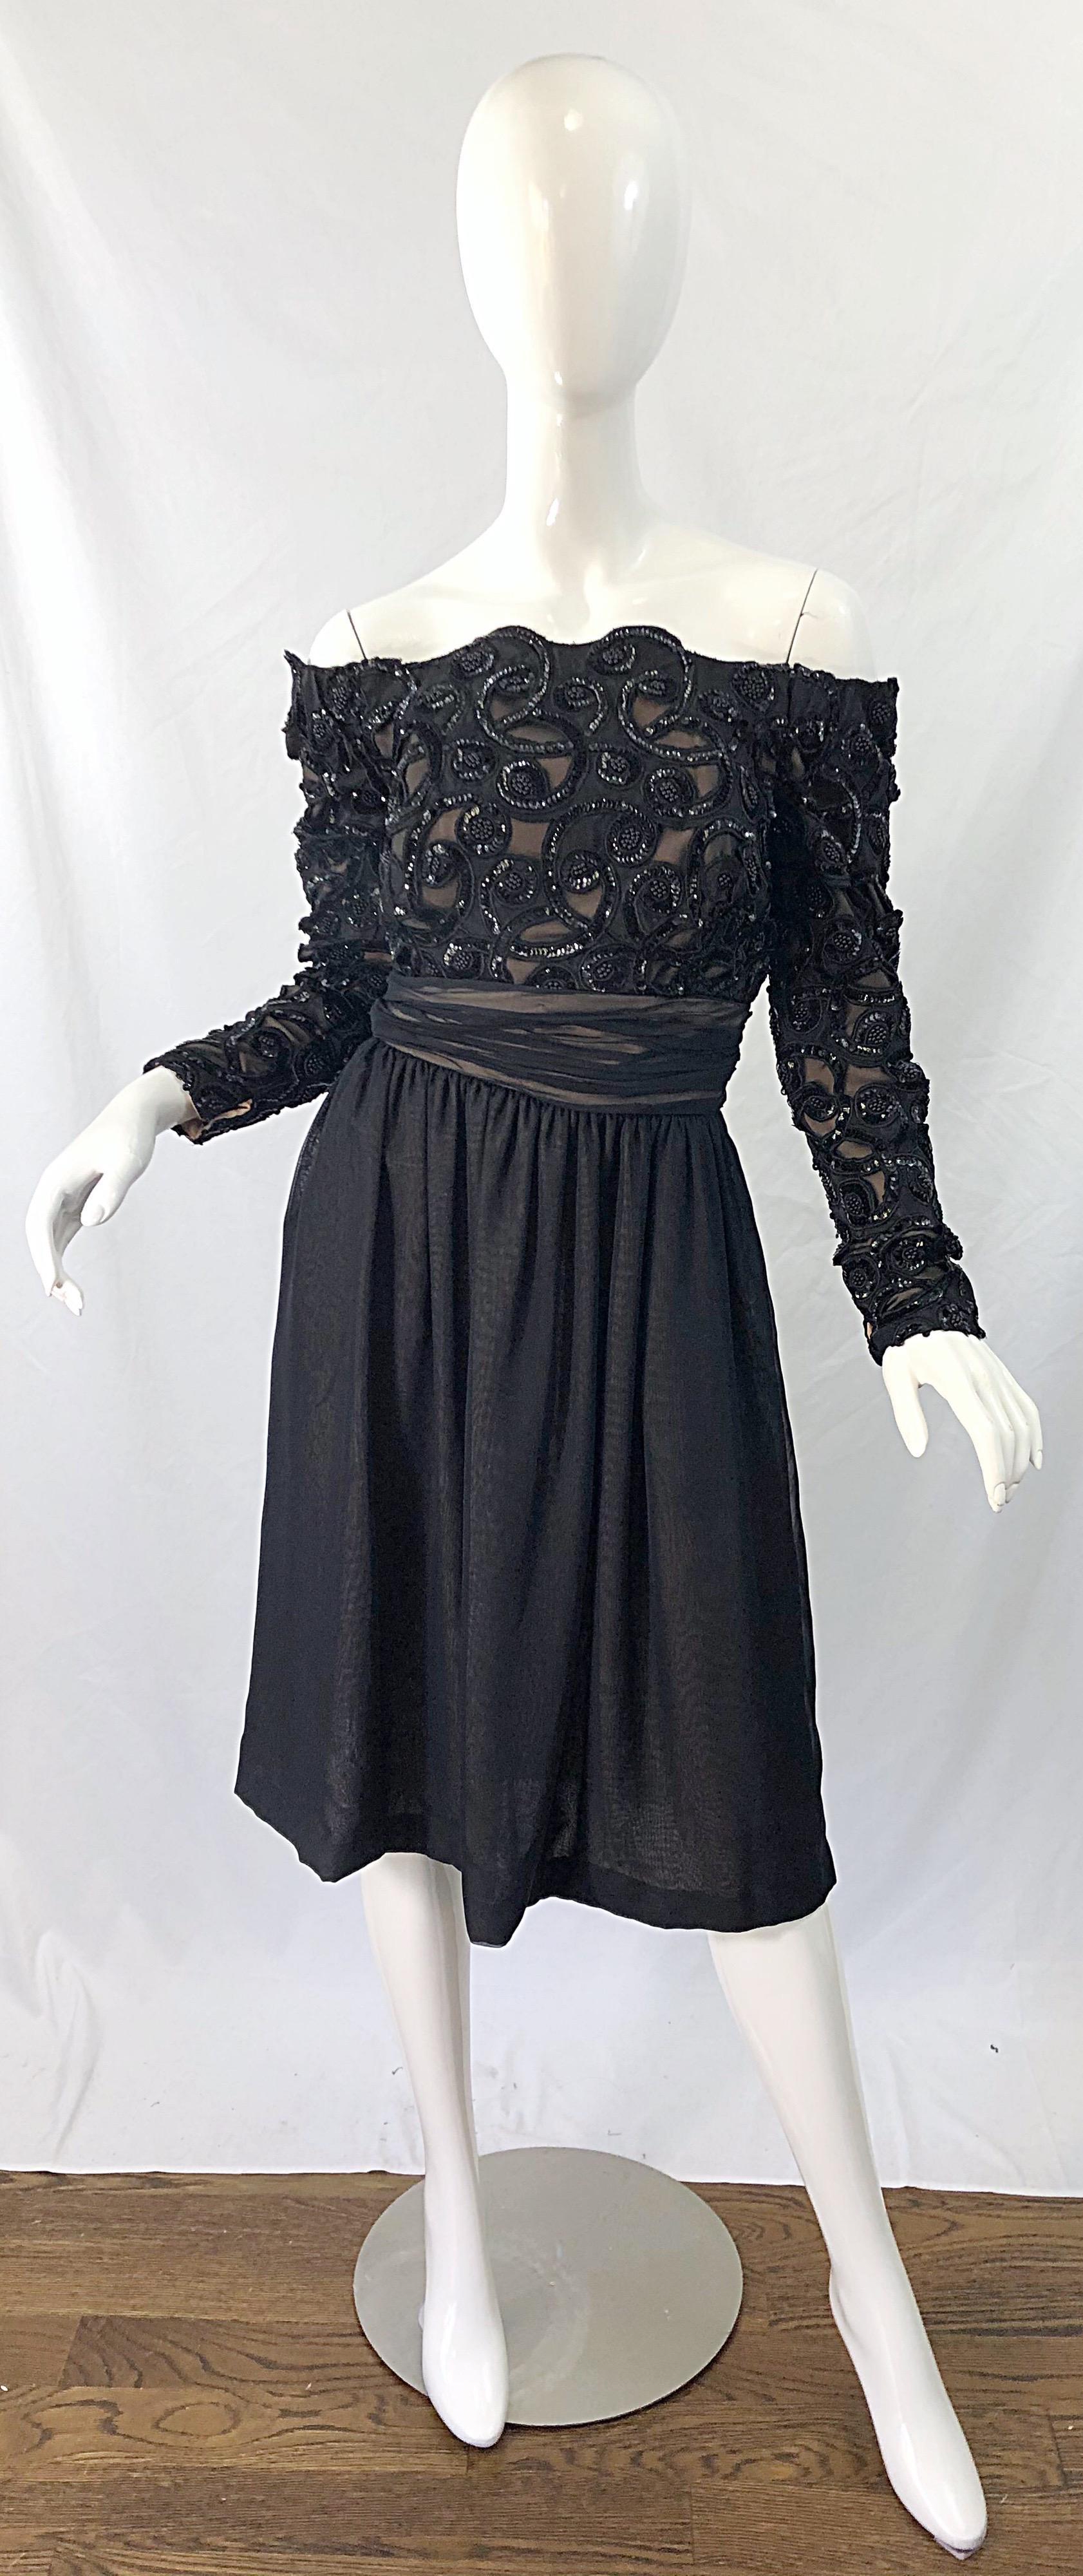 Late 1980s KEVAN HALL COUTURE black off-the-shoulder sequin dress ! Features a nude chiffon underlay with a lace nad sequin bodice. Flowy silk chiffon skirt. Boned bodice. Hidden zipper up the back with hook-and-eye closure. The perfect little black